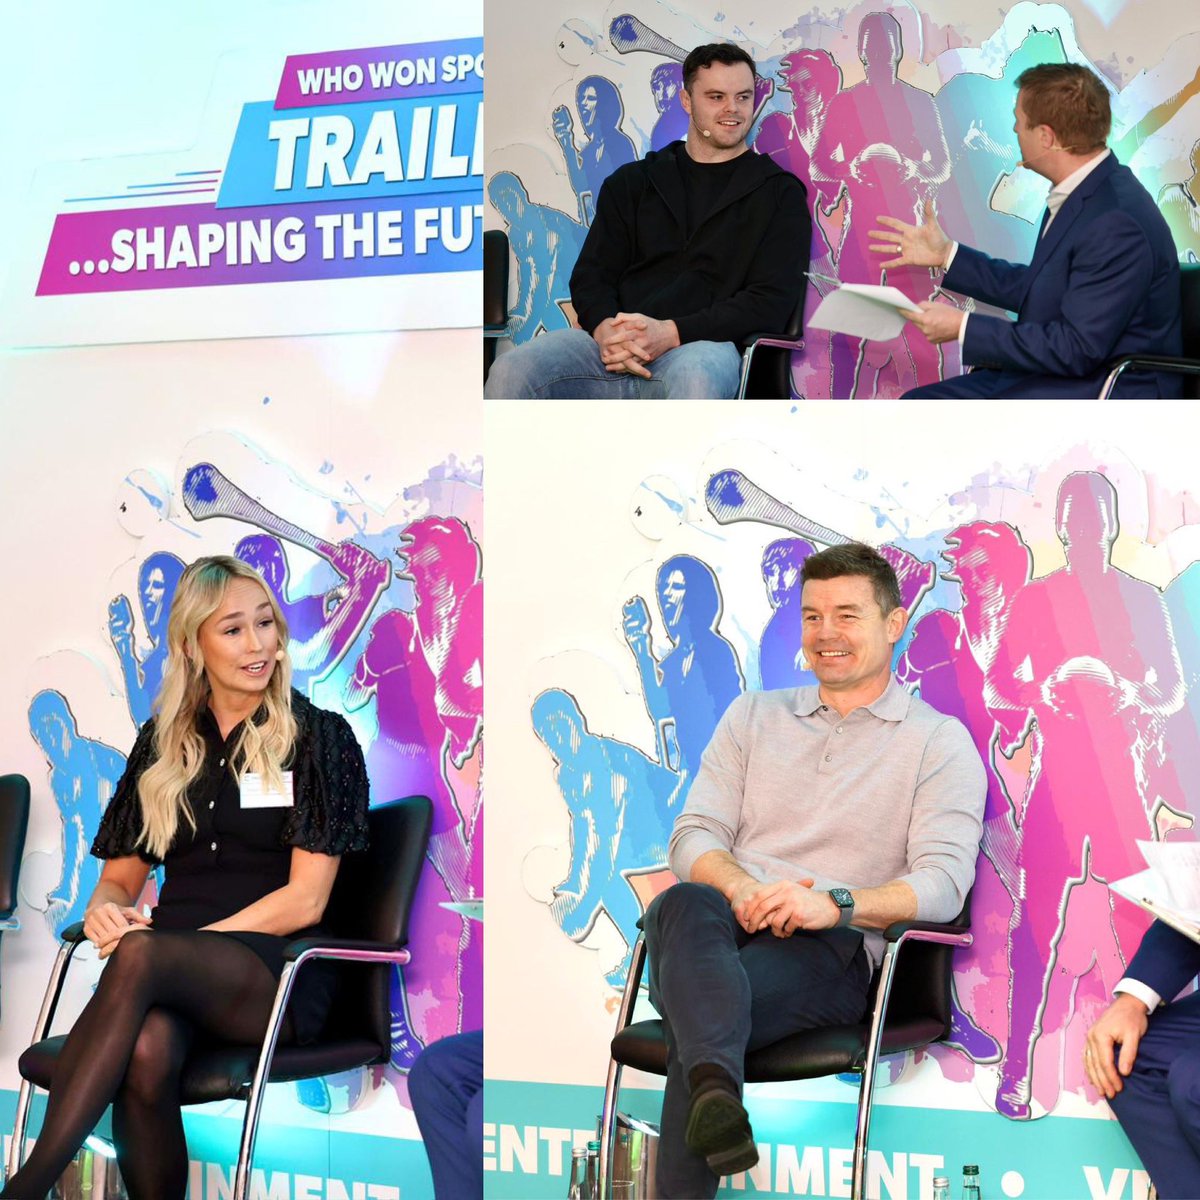 Discussing the impact and importance of Brand Ambassadors across the various brands they work with, we were delighted to welcome some sports stars on stage this morning at #WWSS23 ☘️ @BrianODriscoll @StephanieRoche9 @JamesRyan126